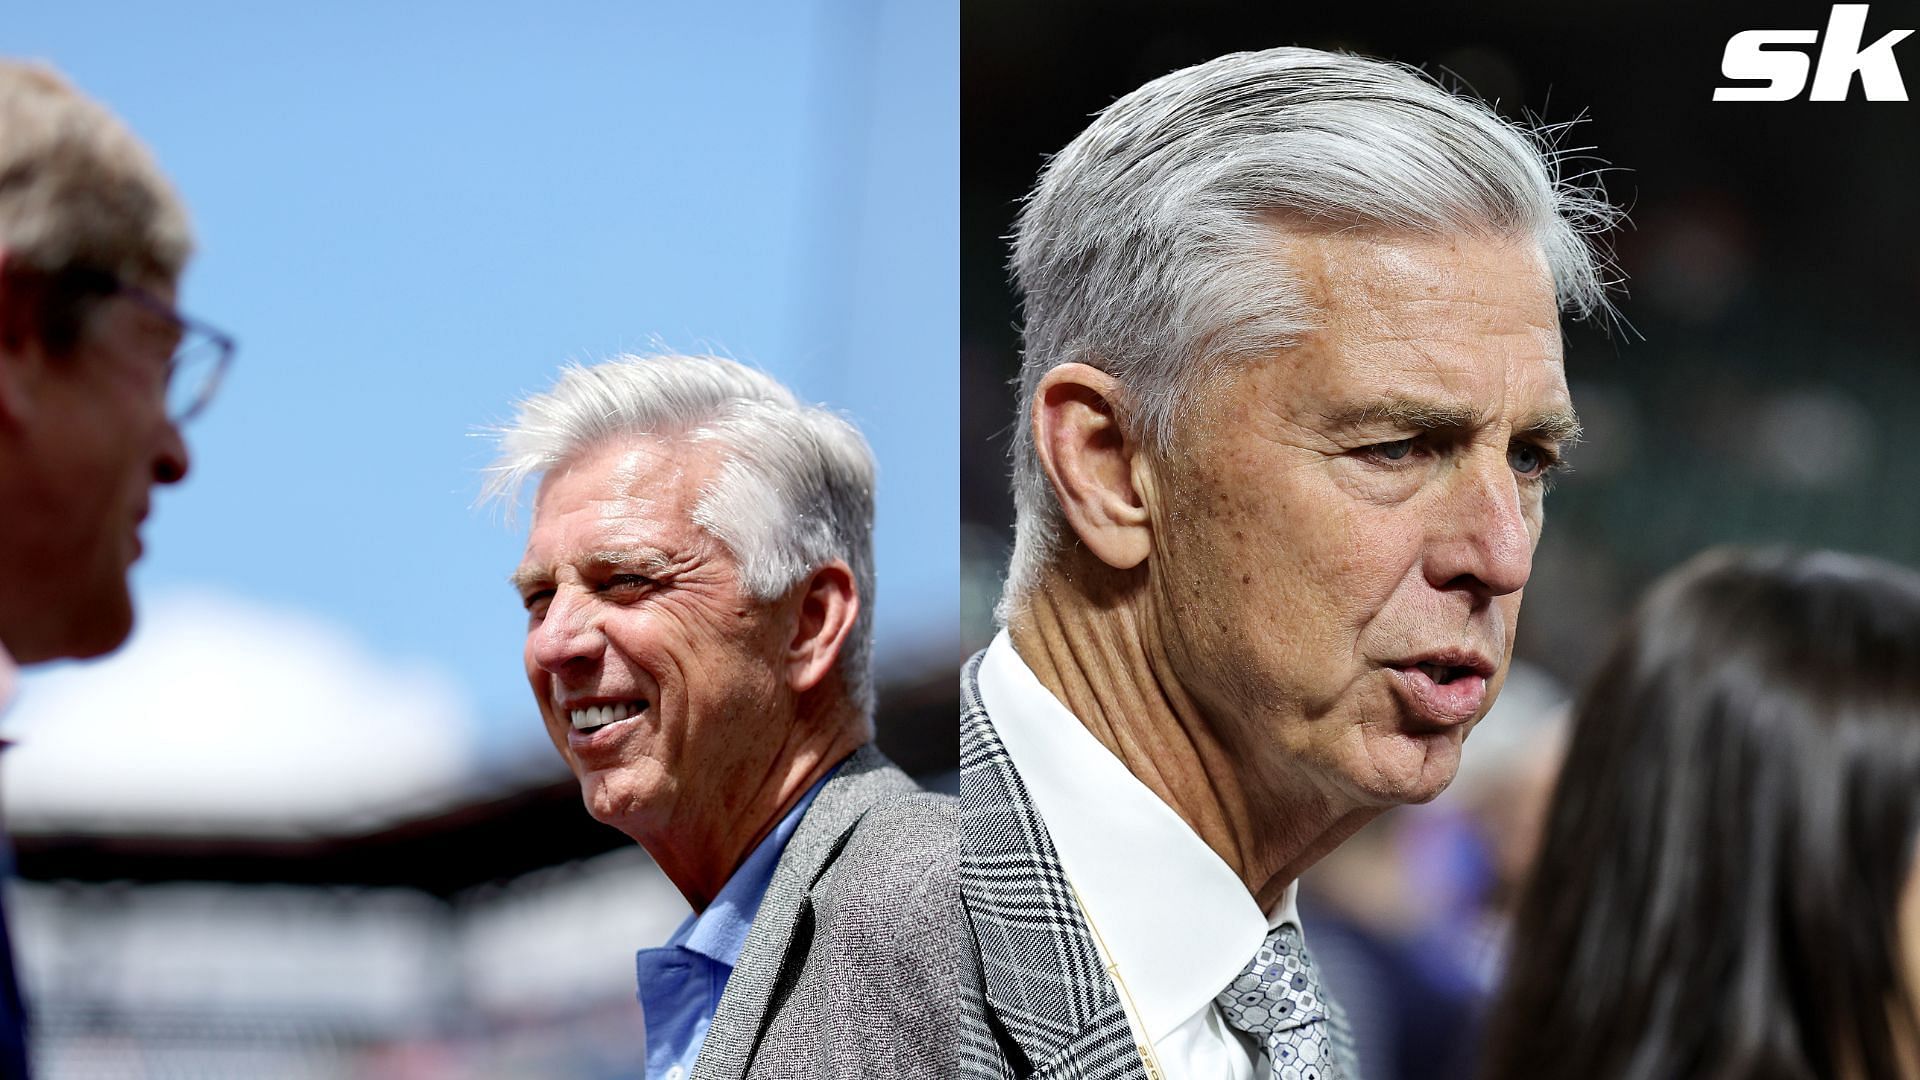 2x World Series winner suggests that Phillies President Dave Dombrowski should be in the Hall of Fame